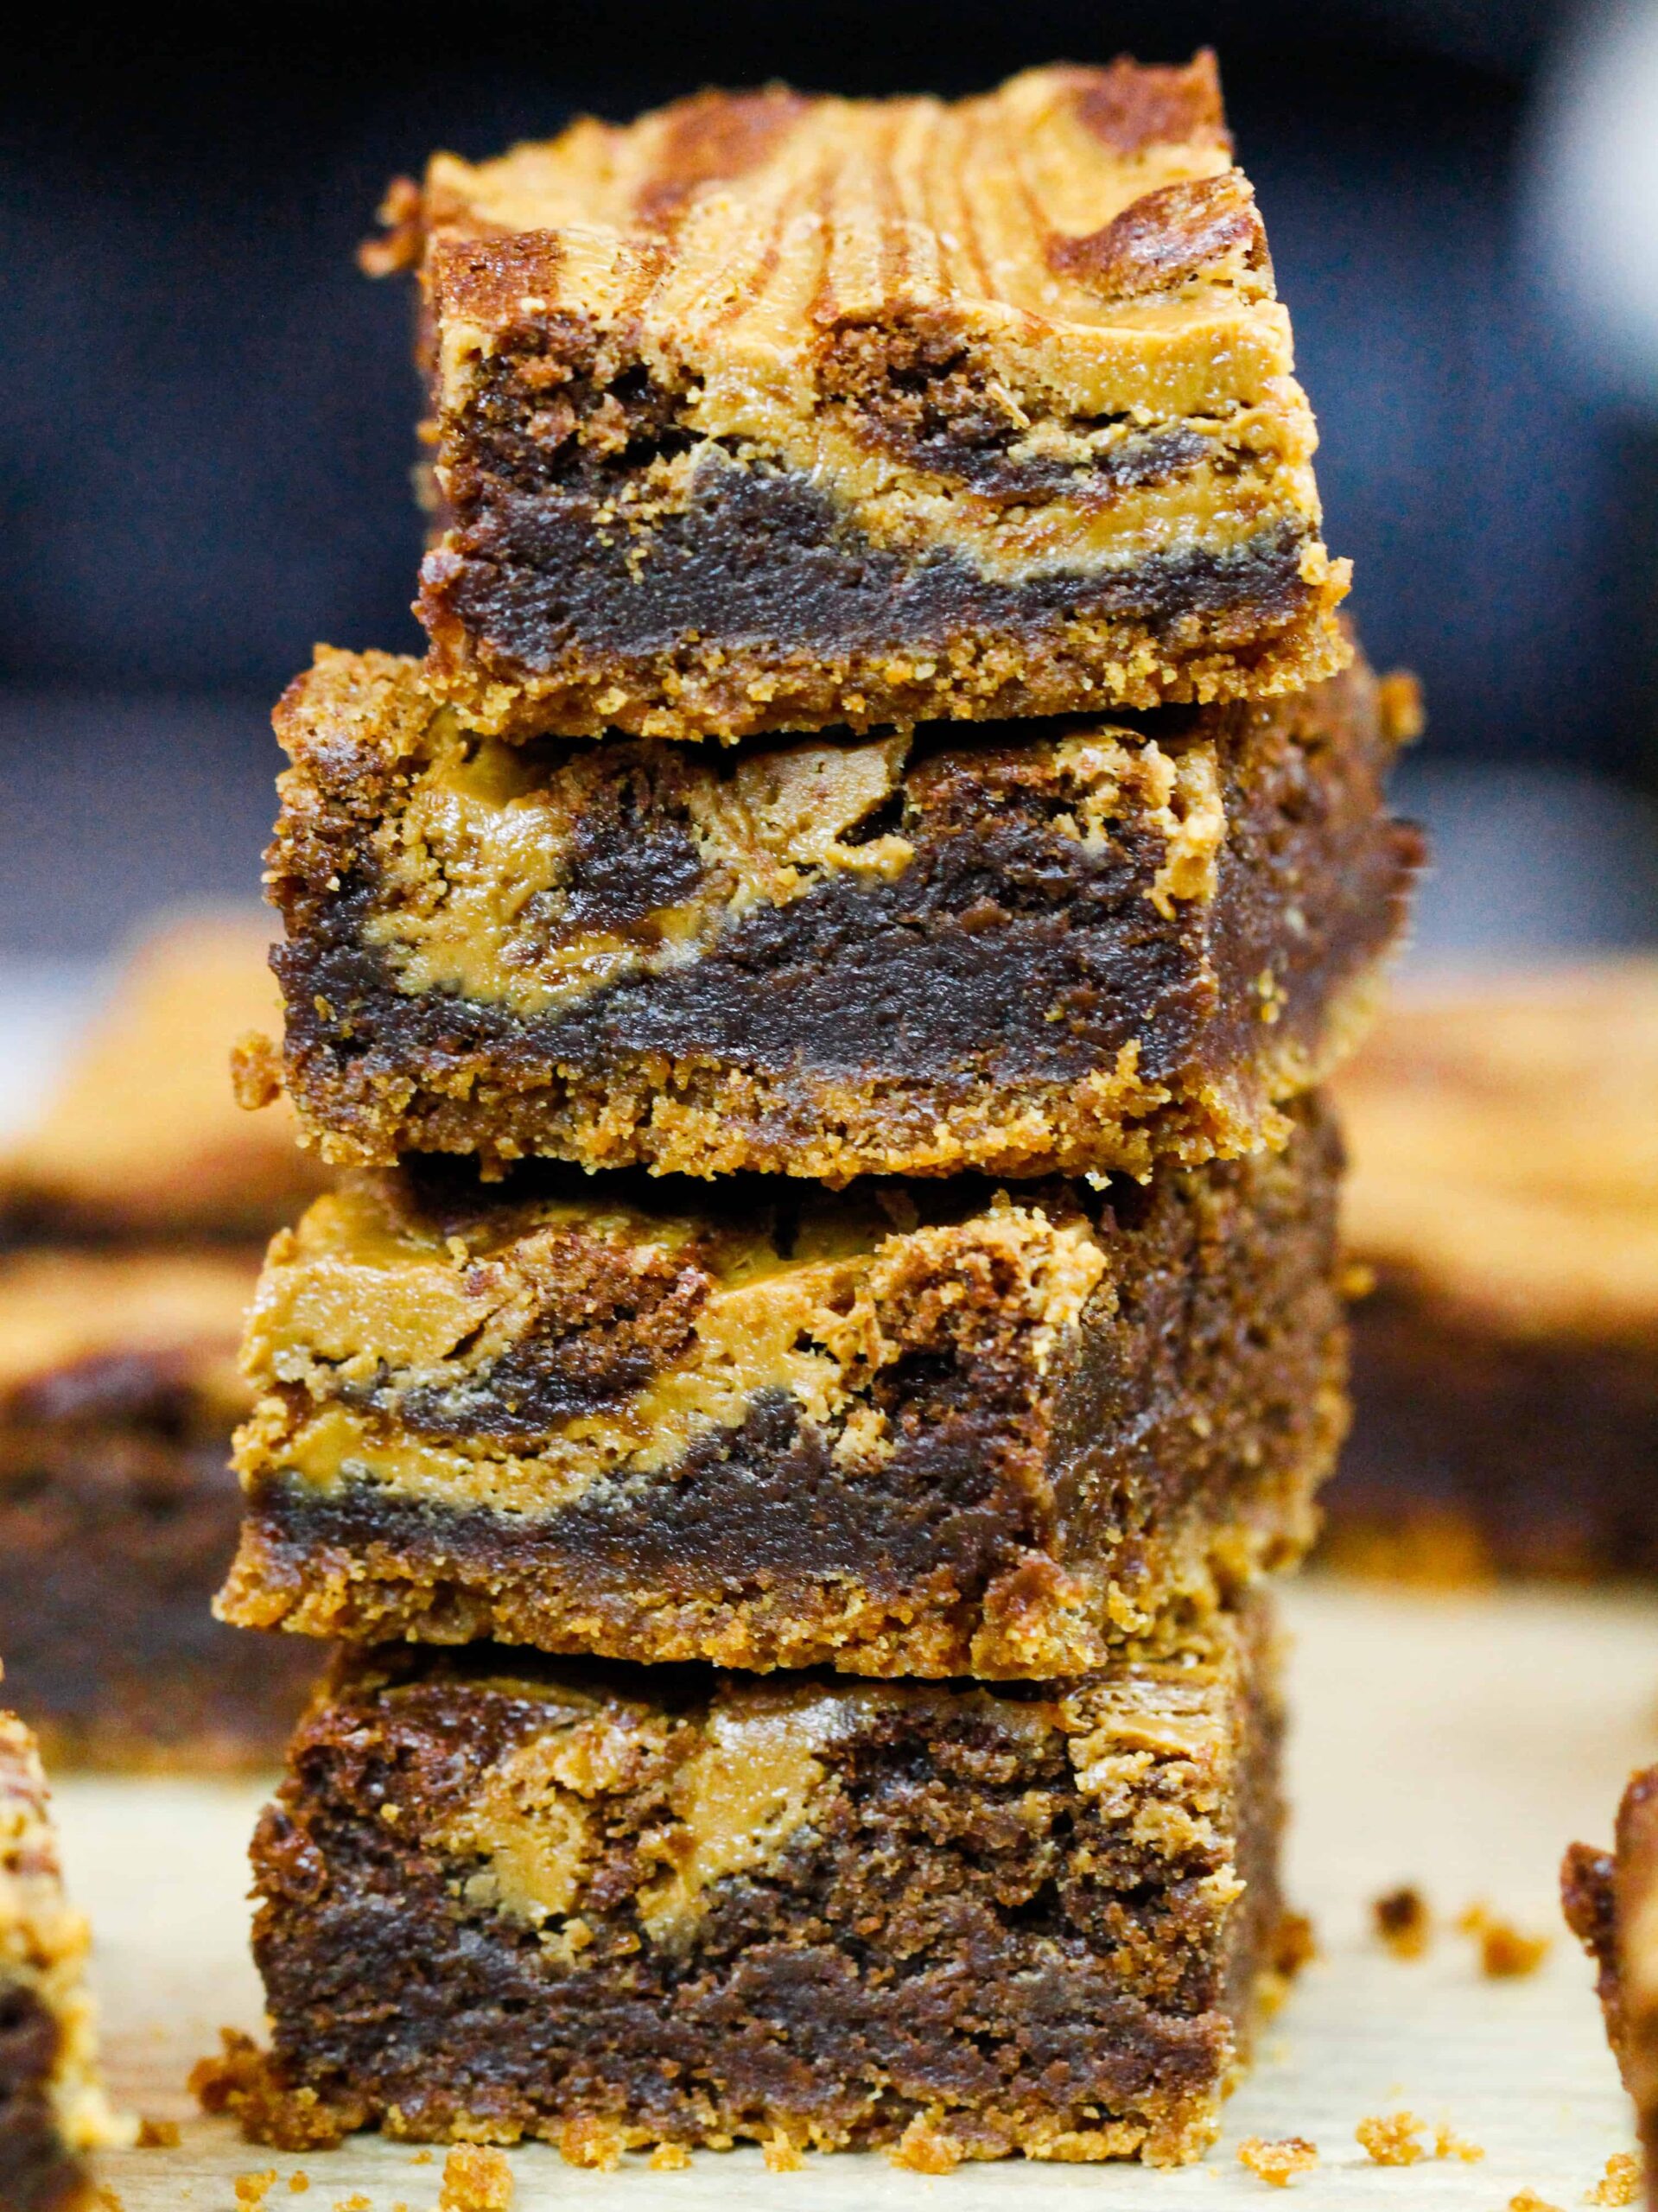 image of biscoff brownies that are stacked on top of each other to show their delicious fudgy texture